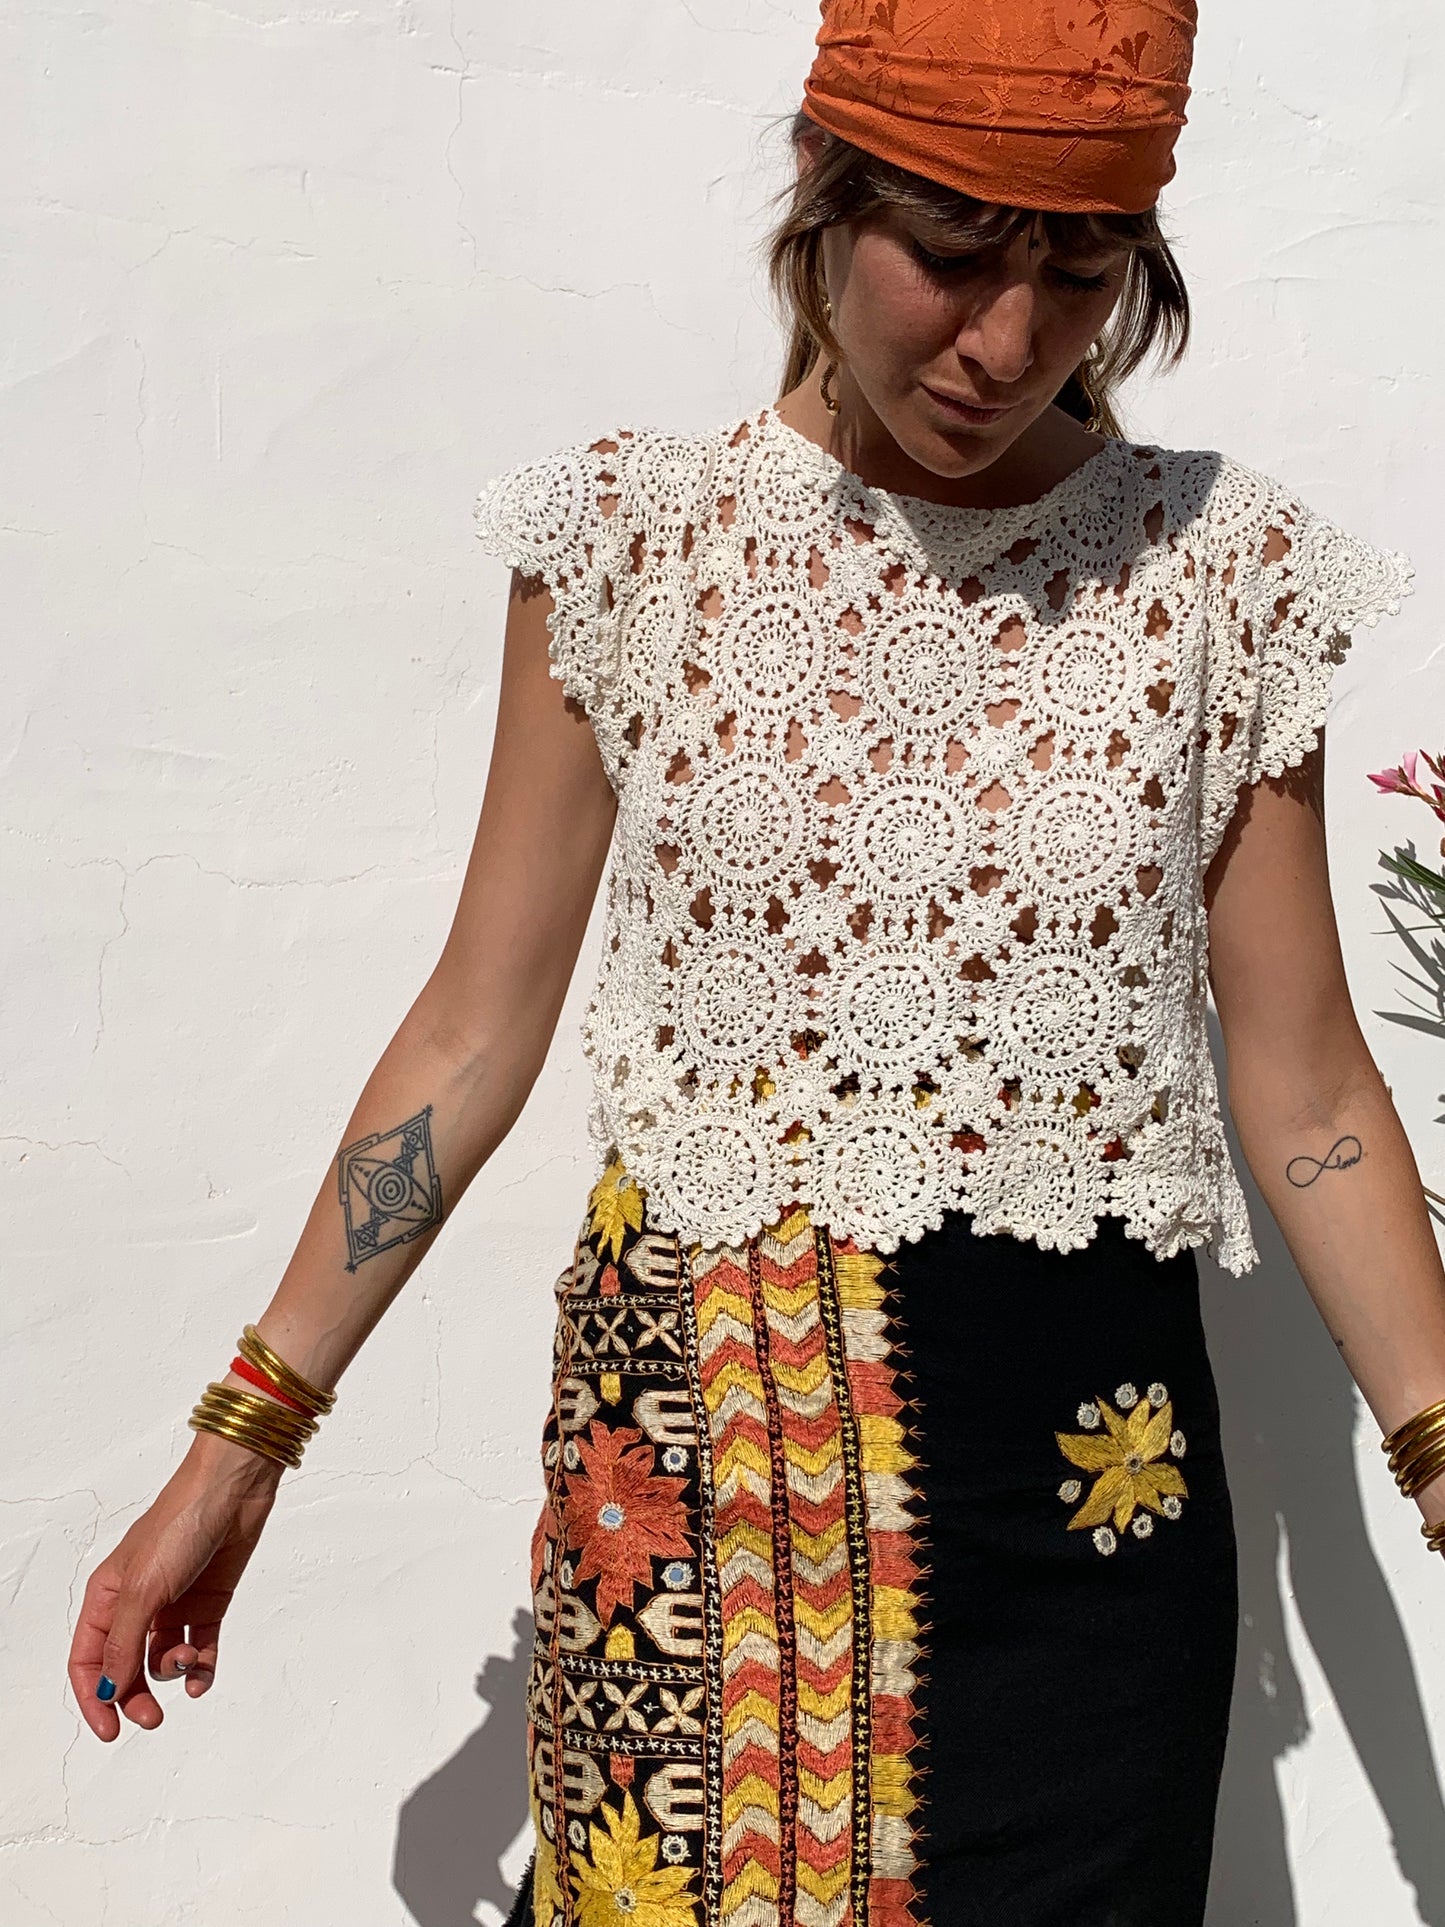 Antique details handmade lace up-cycled top made in Ibiza | Vagabond Ibiza